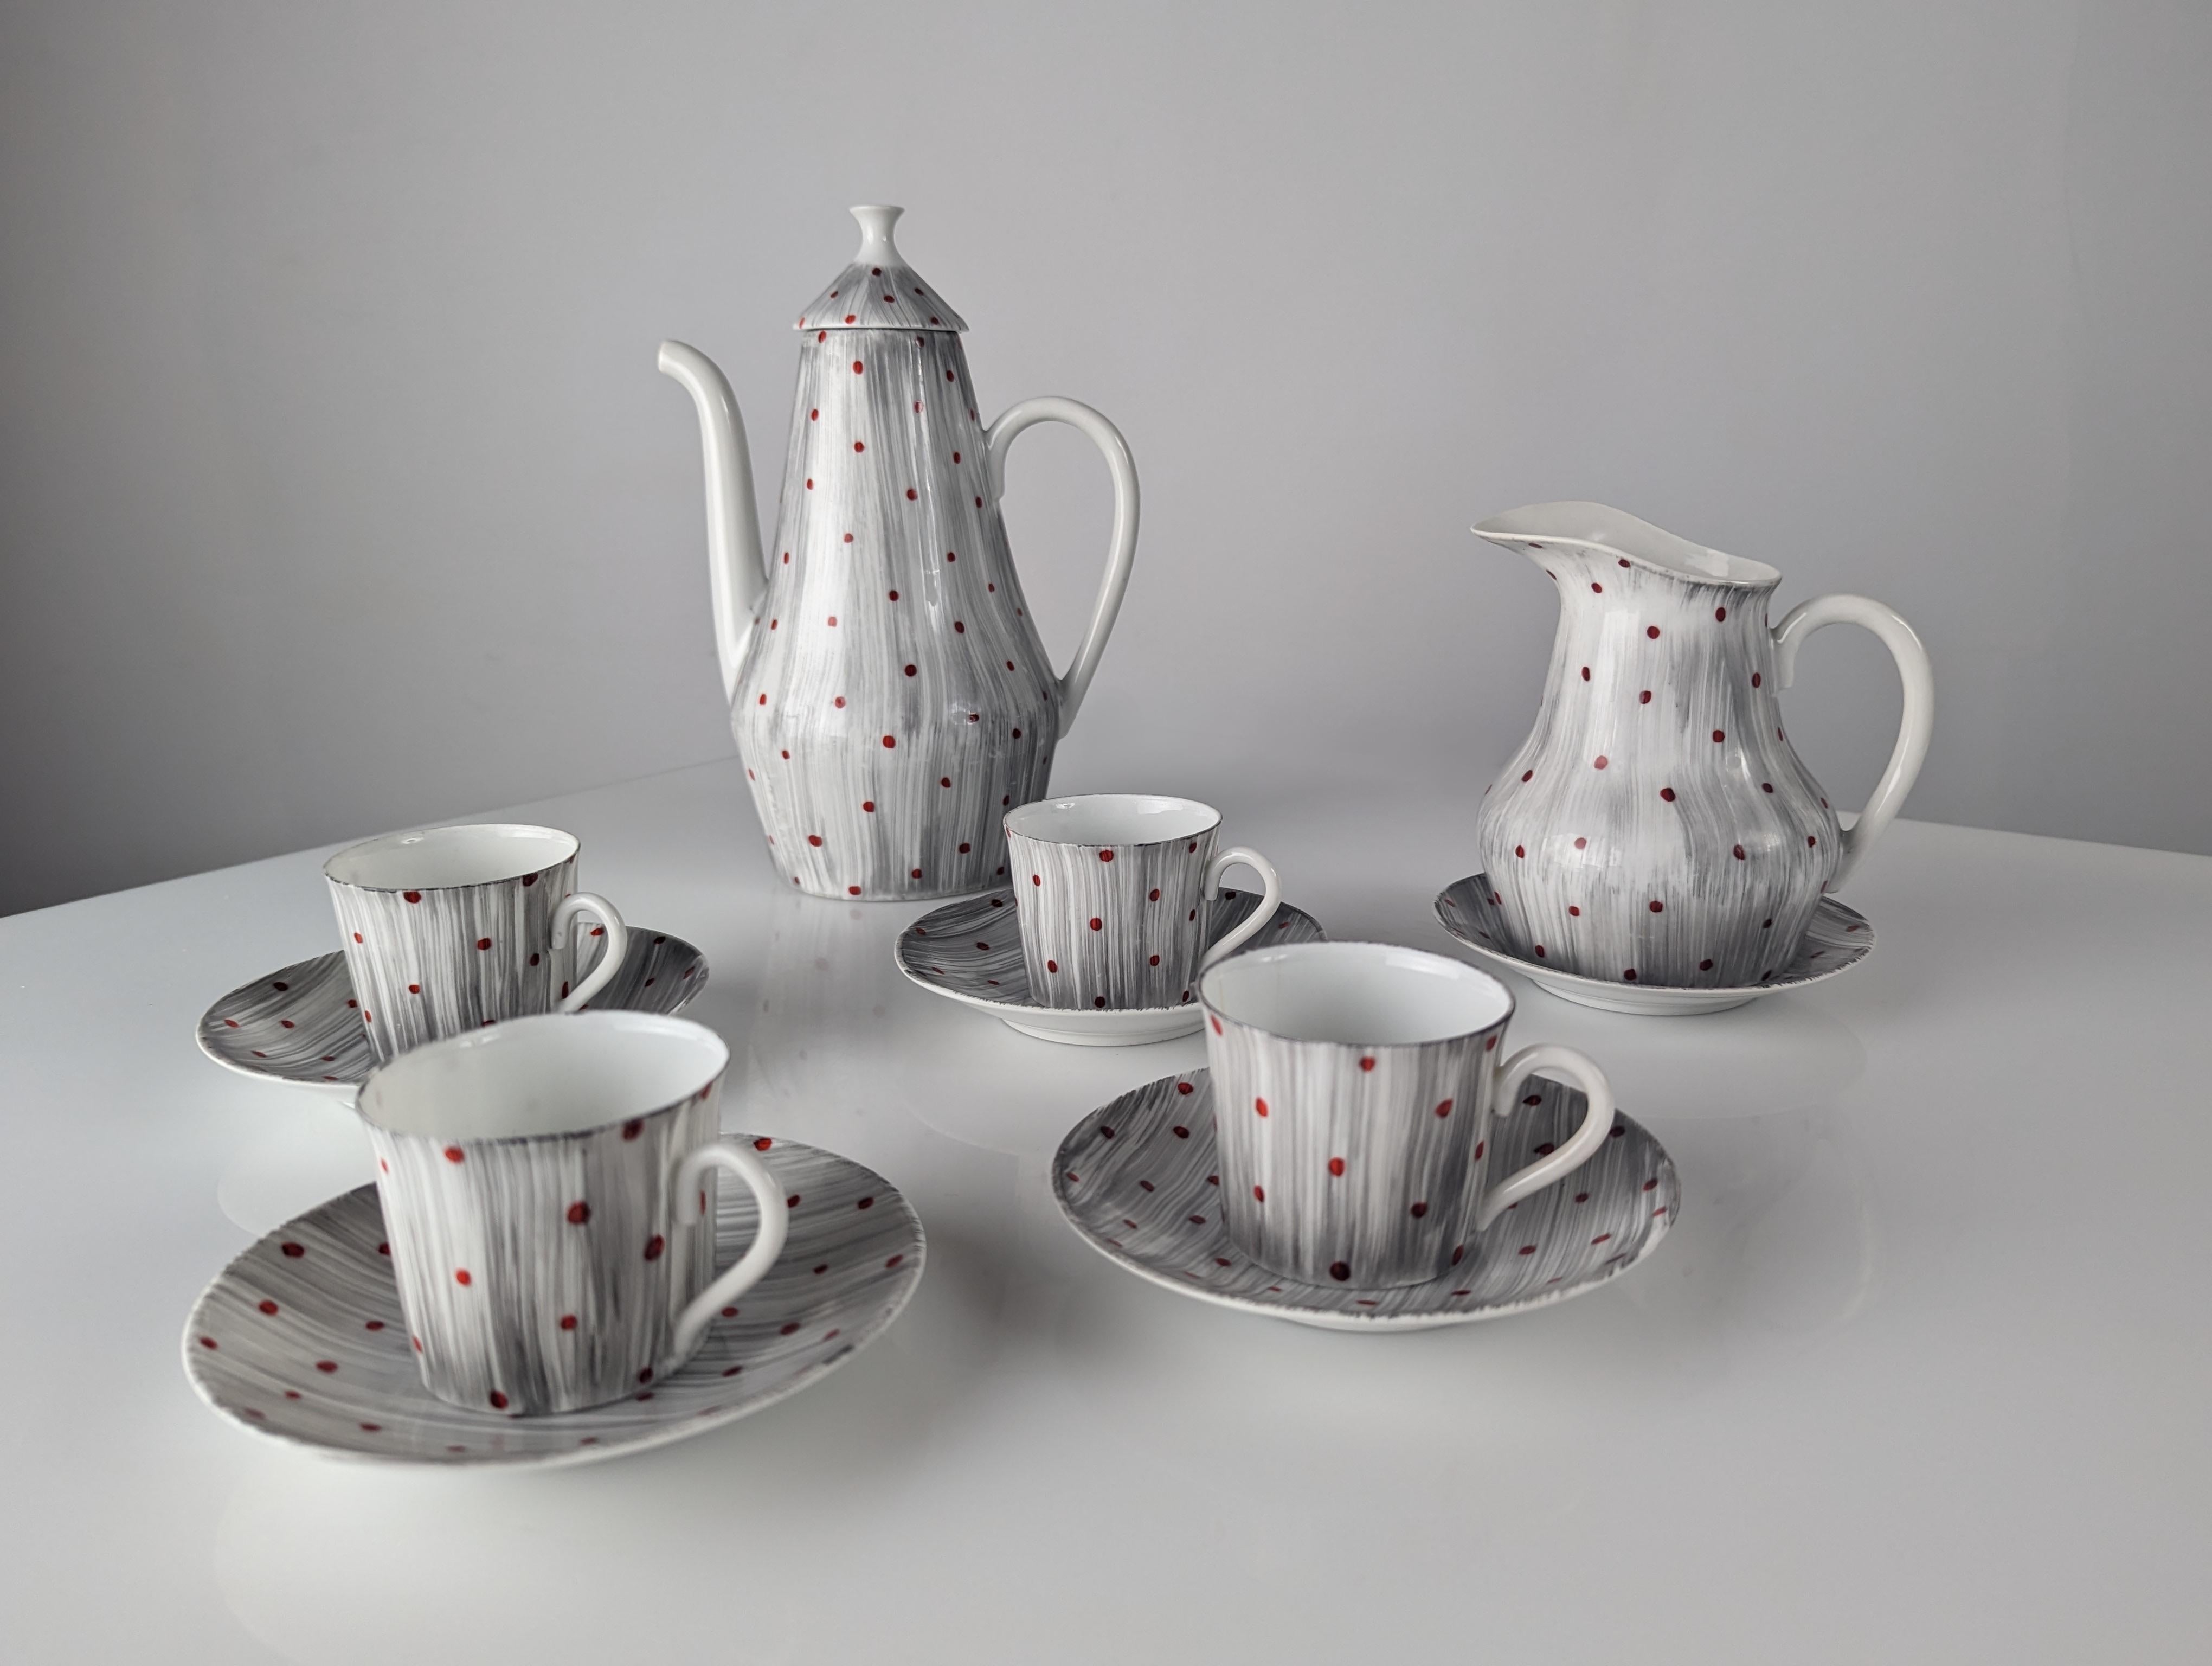 Precious coffee set consisting of a coffee pot, milk jug, 4 cups and 4 saucers from the 1950s, being an iconic porcelain piece that represents an essential part of the rich history of ceramics in the Sargadelos region, located in Galicia, Spain. To